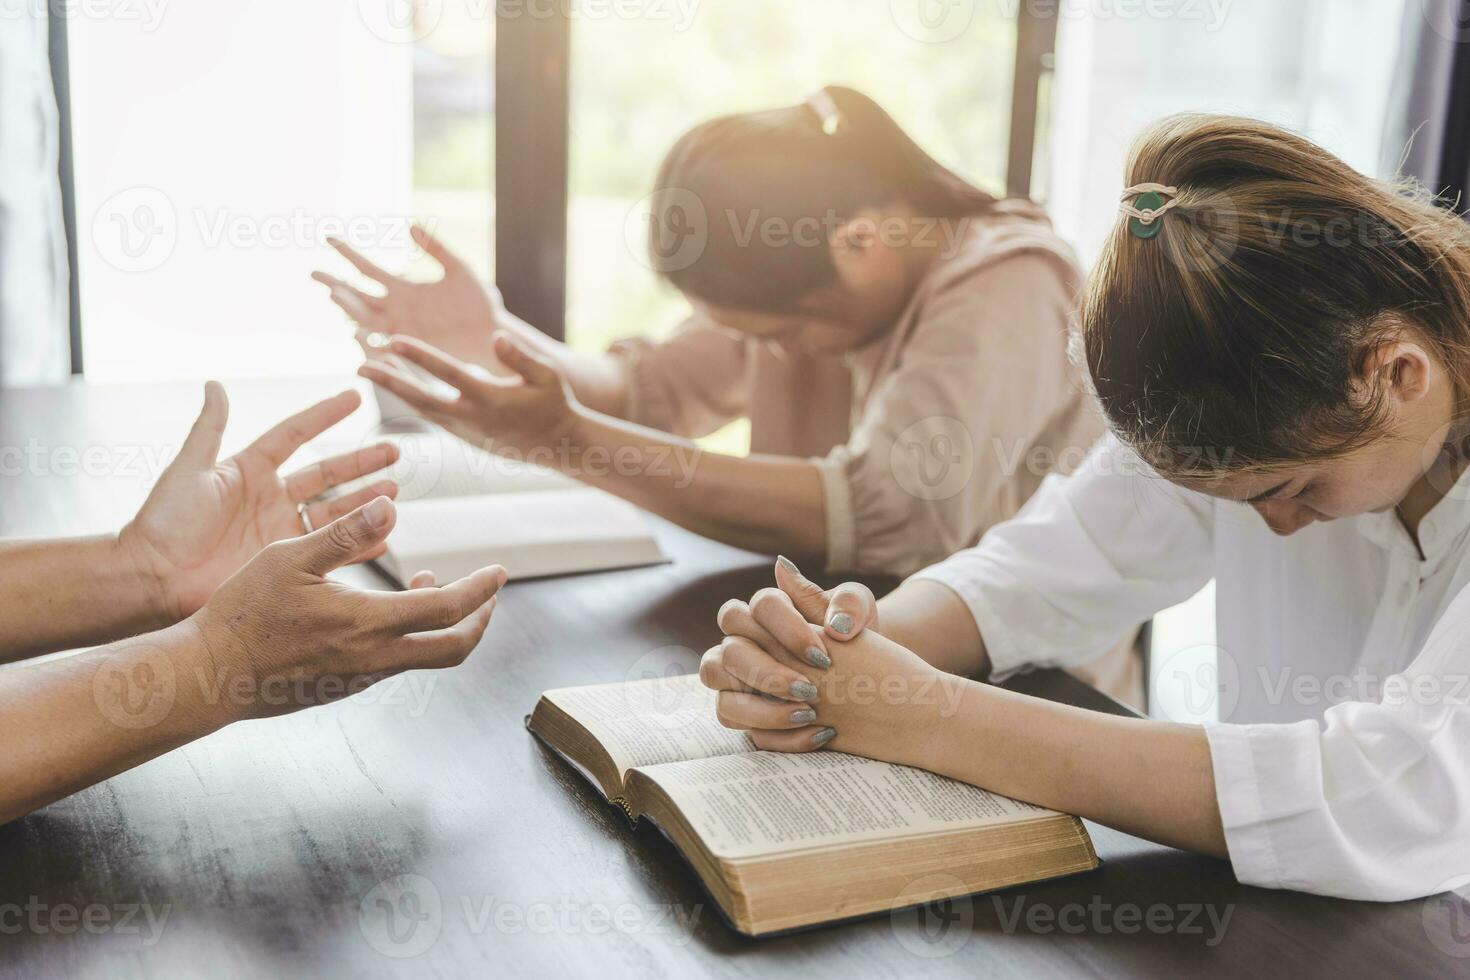 pray together to the Lord on the table with the bible concept of believing in God May God give you hope to overcome obstacles. Home church, devotion or prayer, religious concept. photo